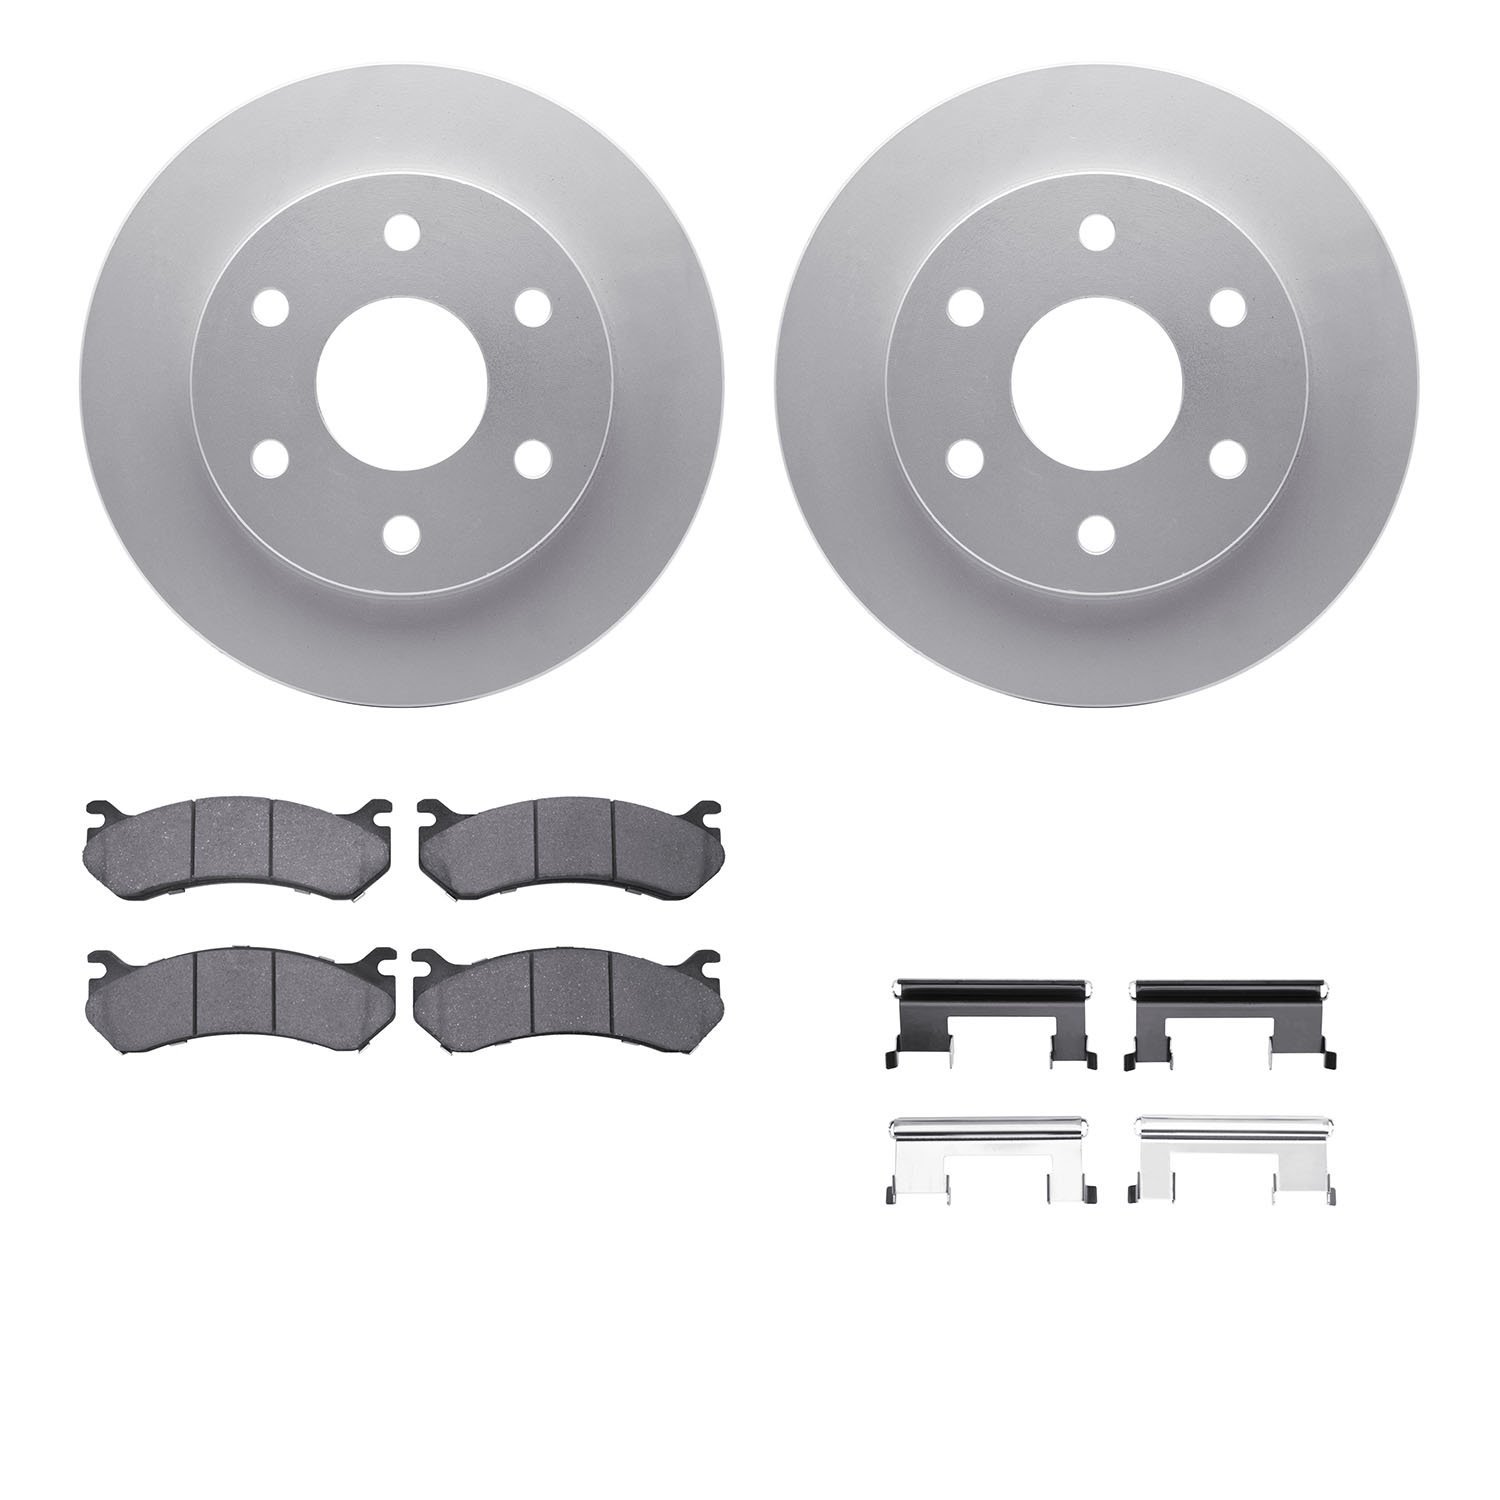 4412-48012 Geospec Brake Rotors with Ultimate-Duty Brake Pads & Hardware, 1999-2008 GM, Position: Front